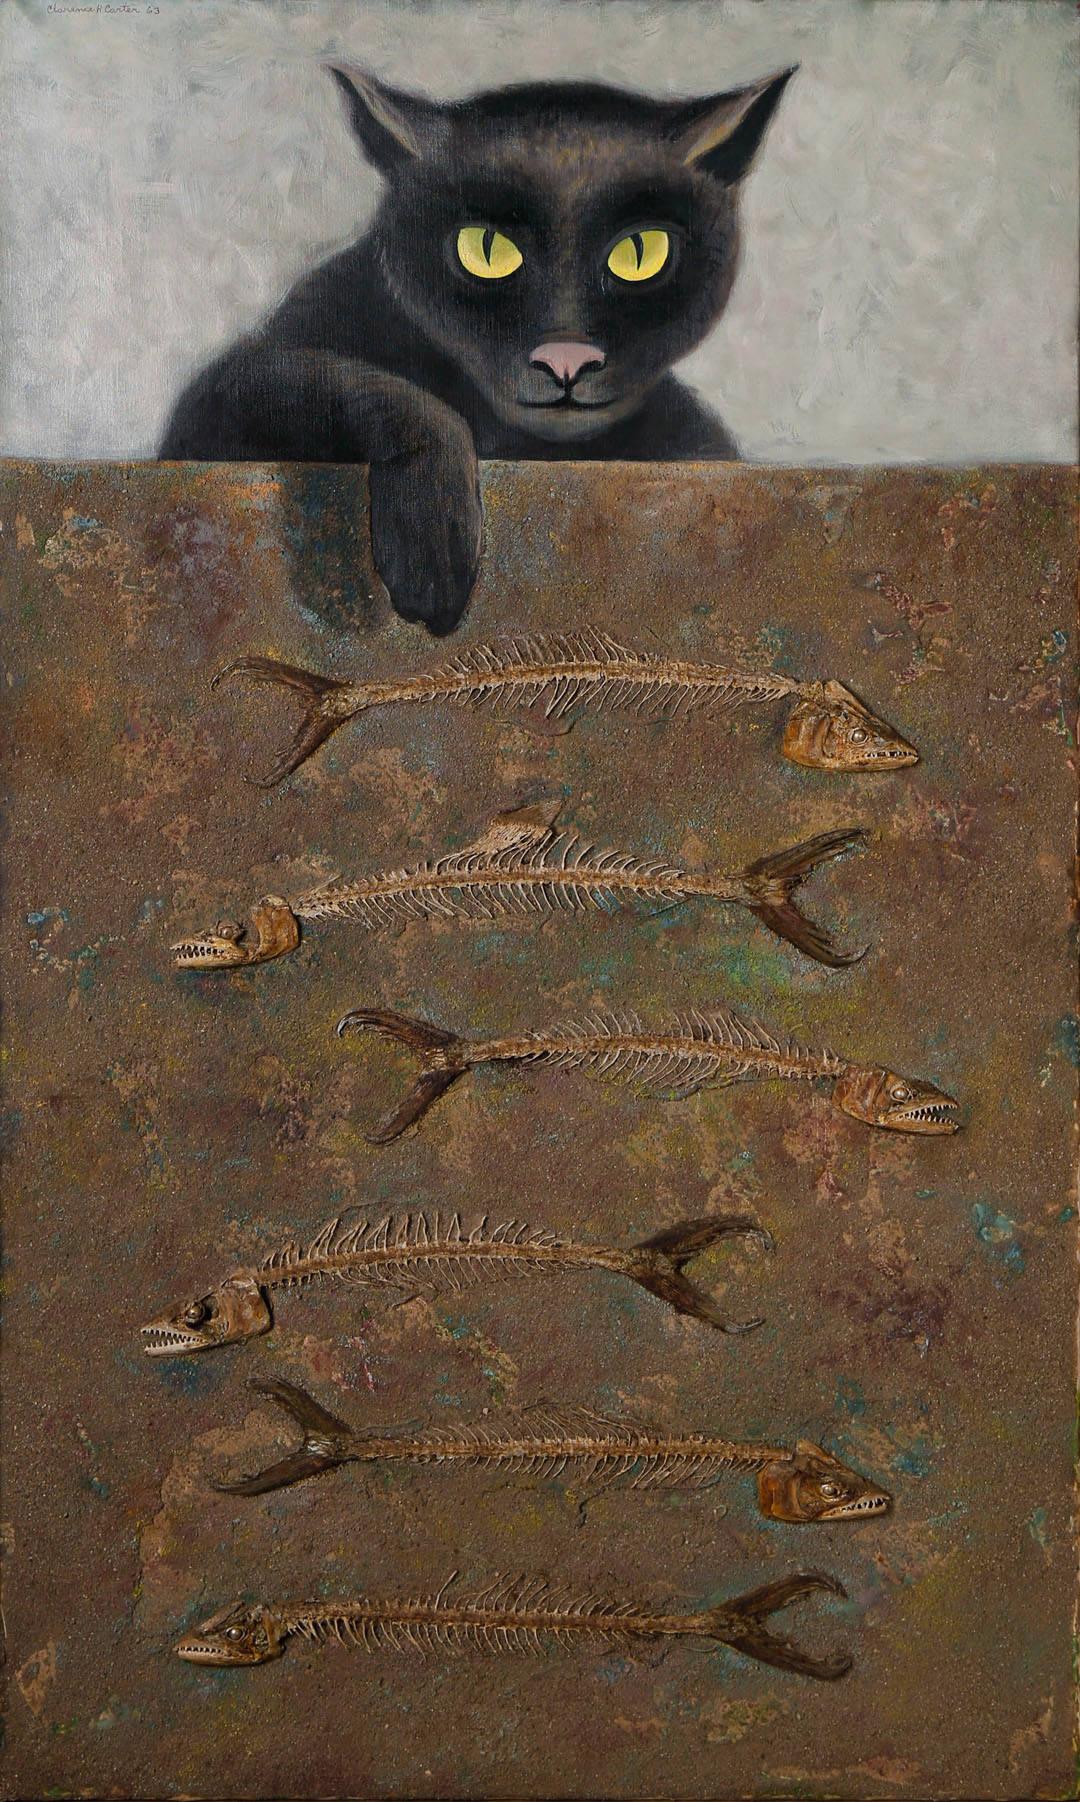 Over and Above: No. 6, Surreal Cat w/ Fish Bones, 20th Century Cleveland School - American Modern Painting by Clarence Holbrook Carter